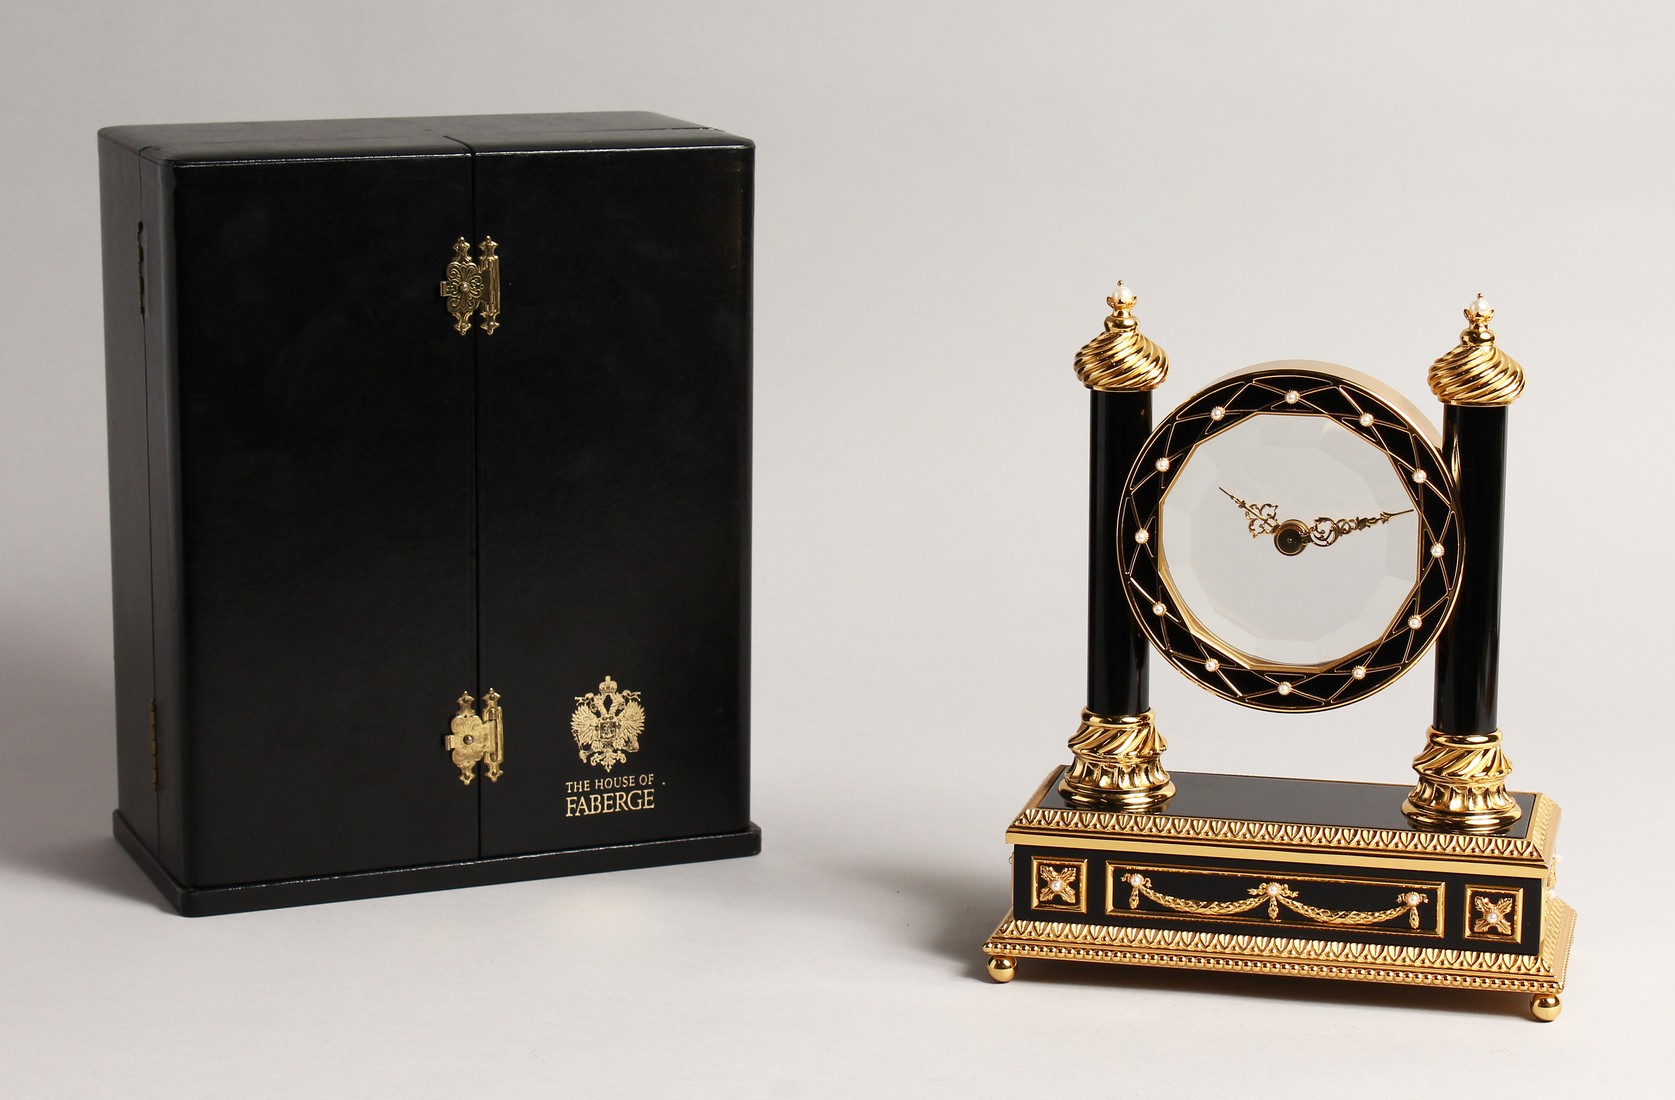 A SUPERB HOUSE OF FABERGE MYSTERY CLOCK from The Franklin Mint, 1988, in its original case 8.5ins - Bild 5 aus 5